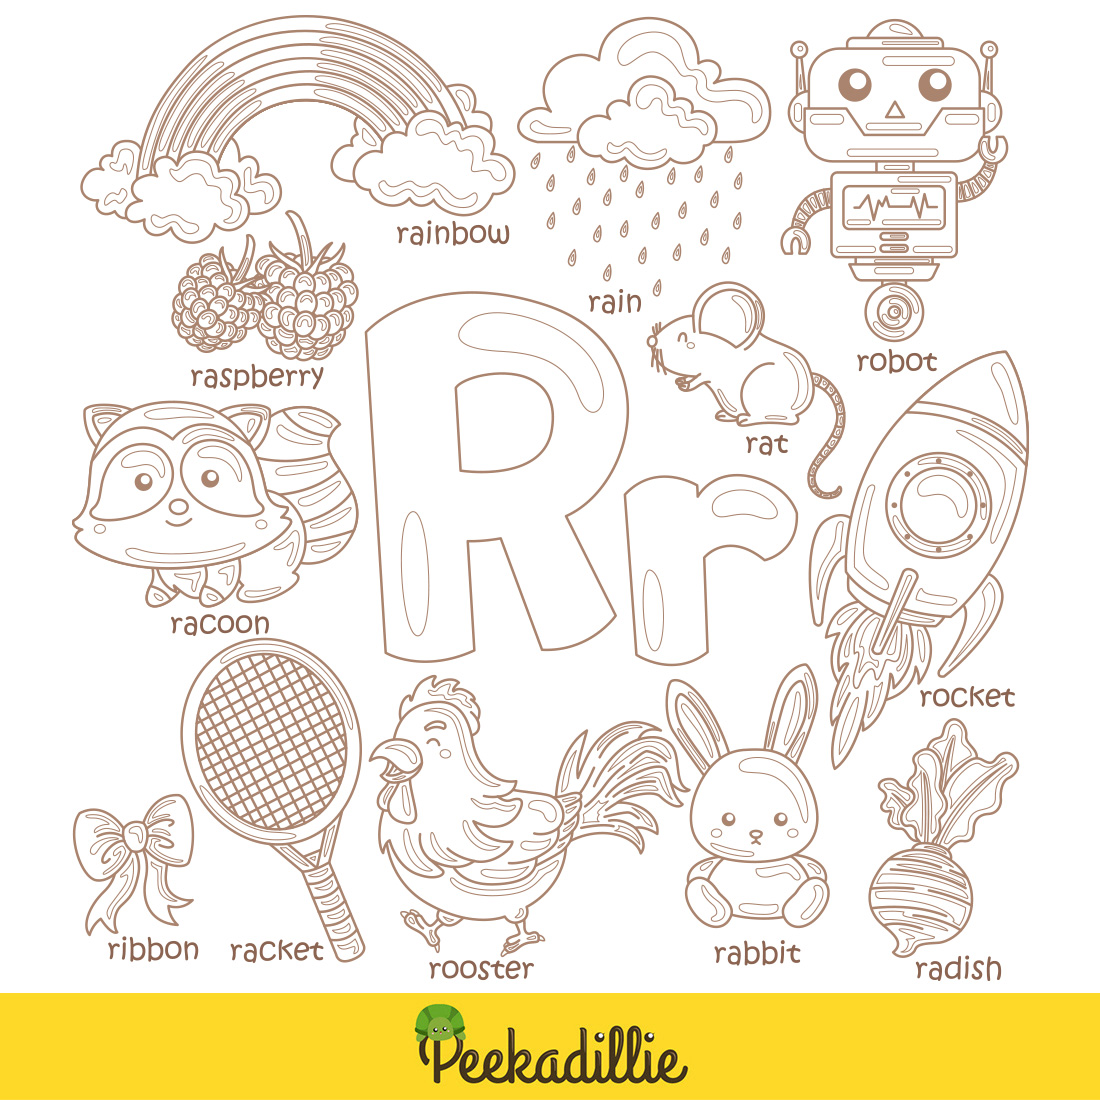 Alphabet R For Vocabulary School Lesson Rocket Robot Rat Rabbit Radish Ribbon Racoon Racket Rainbow Raspberry Rain Rooster Cartoon Digital Stamp Outline Black and White preview image.